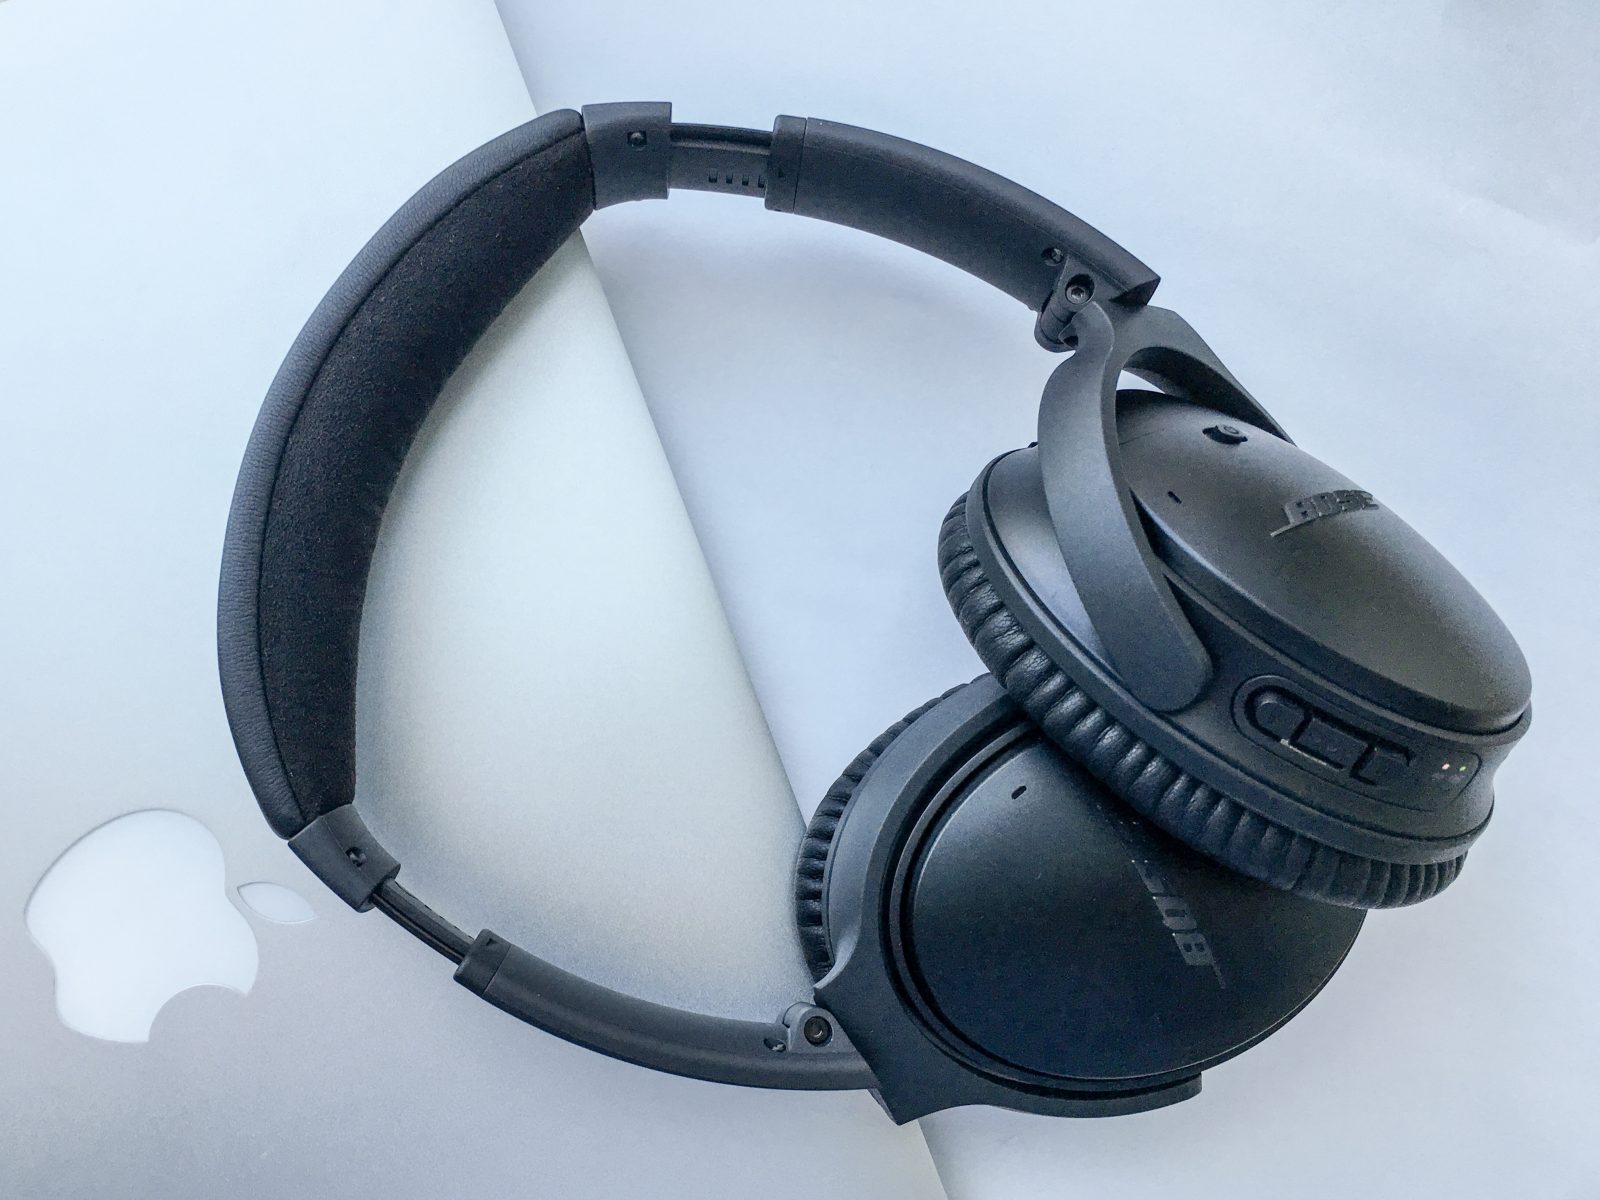 How to Connect a Pair of Bose Headphones via NFC?